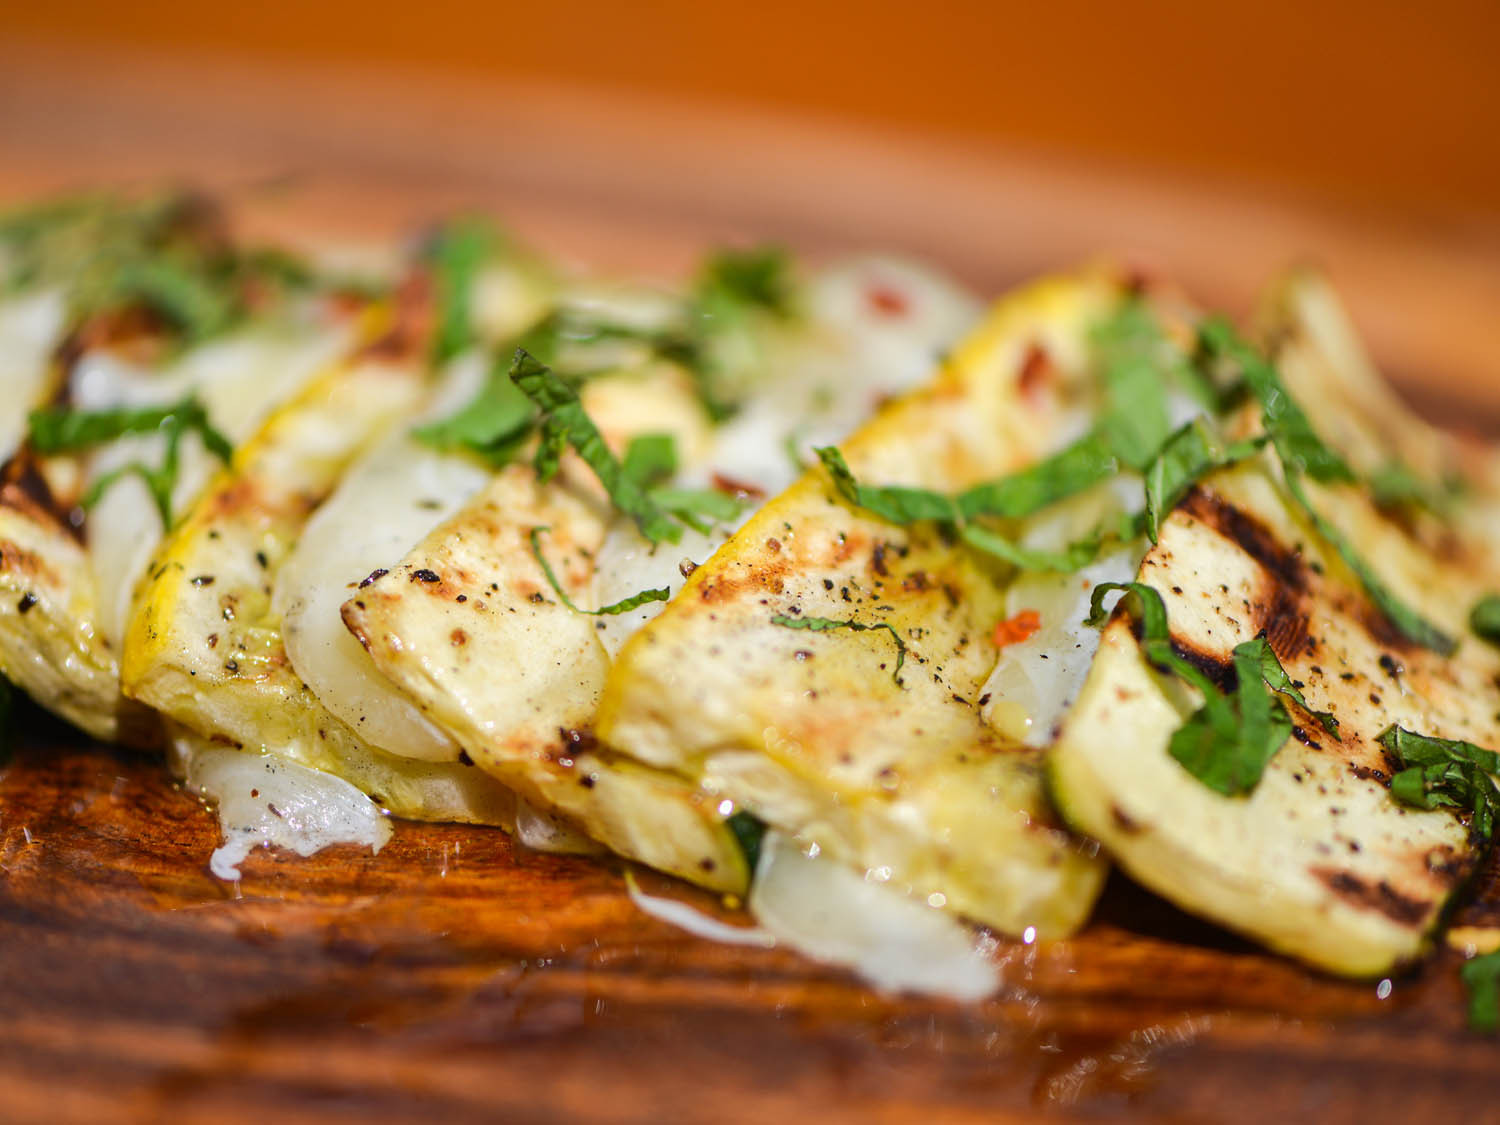 Squash On The Grill
 Grilled Summer Squash and Kasseri Cheese With Lemon and